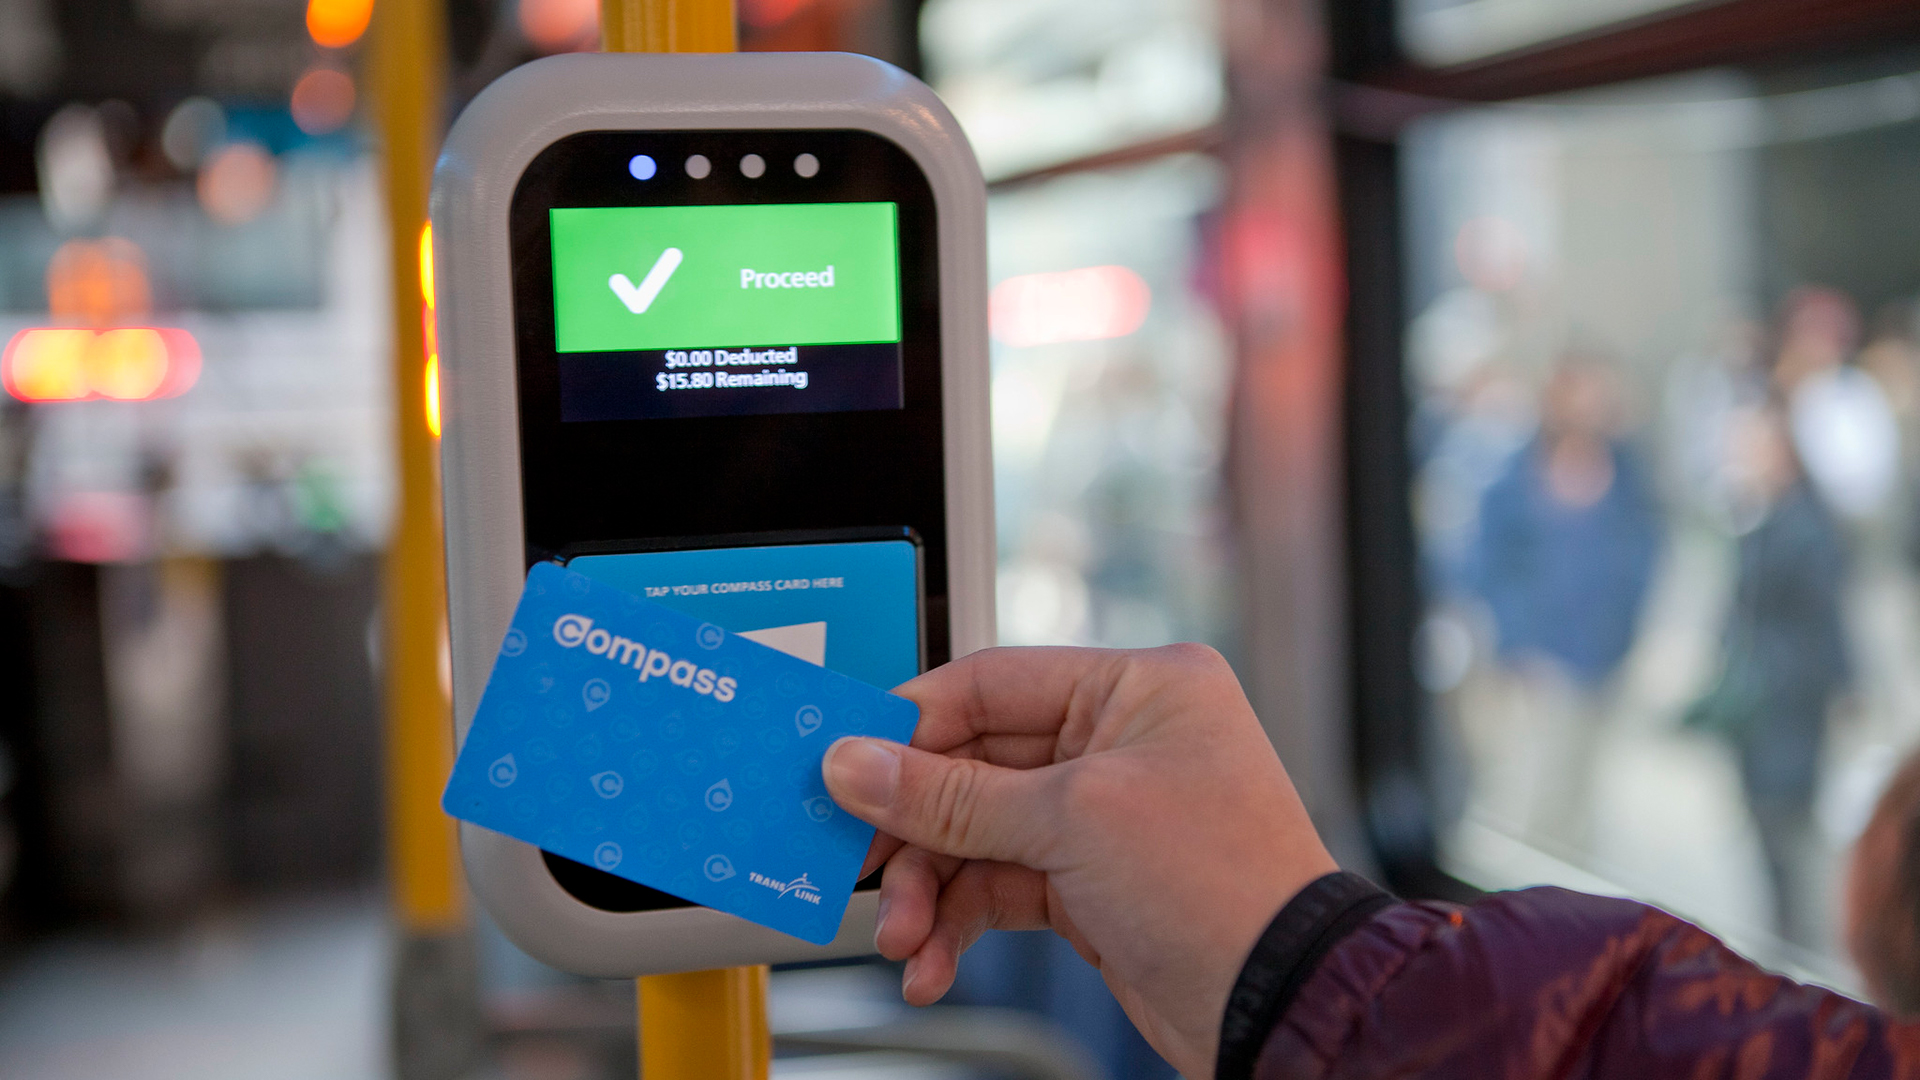 The rollout of a new payment system for public transportation across the Bay Area has been postponed